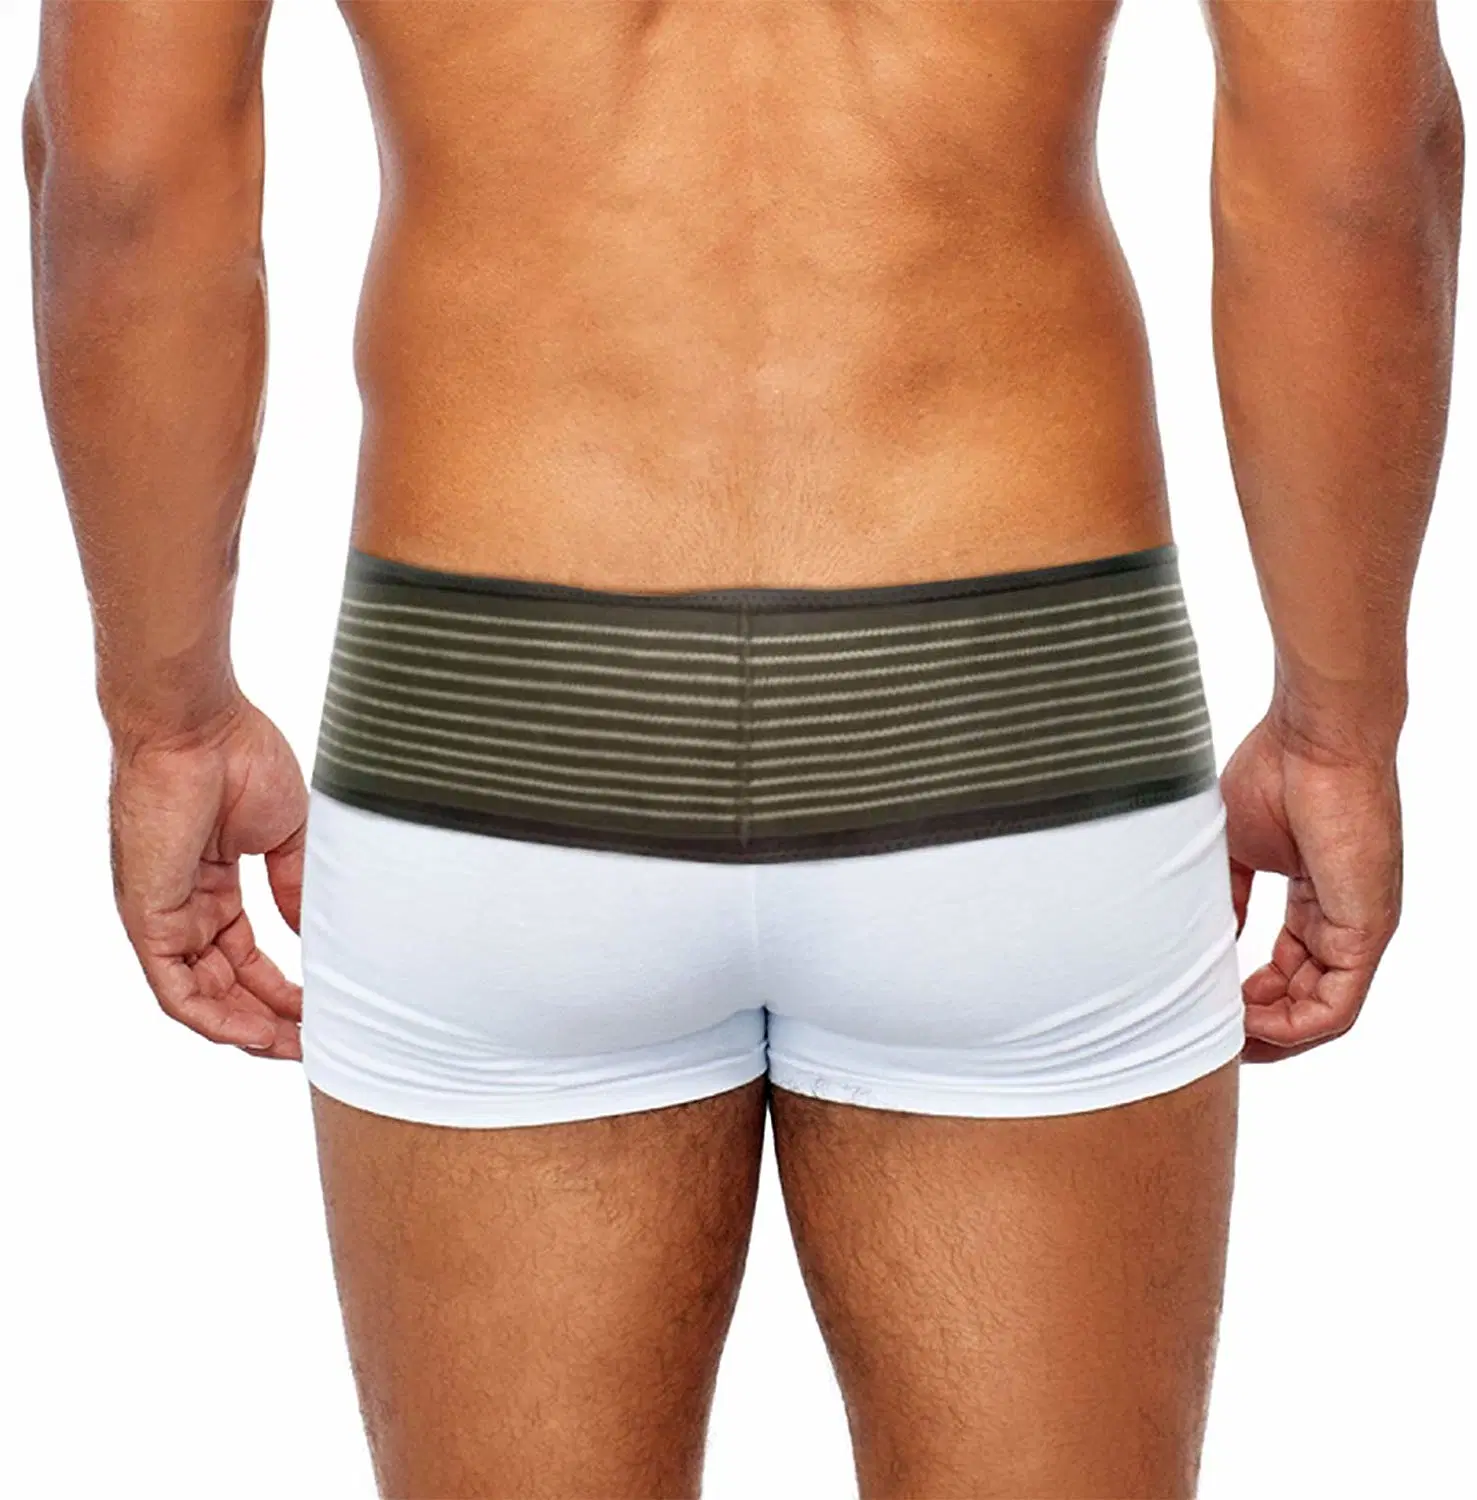 Adjustable Si Joint Support Belt for Support Your Pelvis and Lower Back